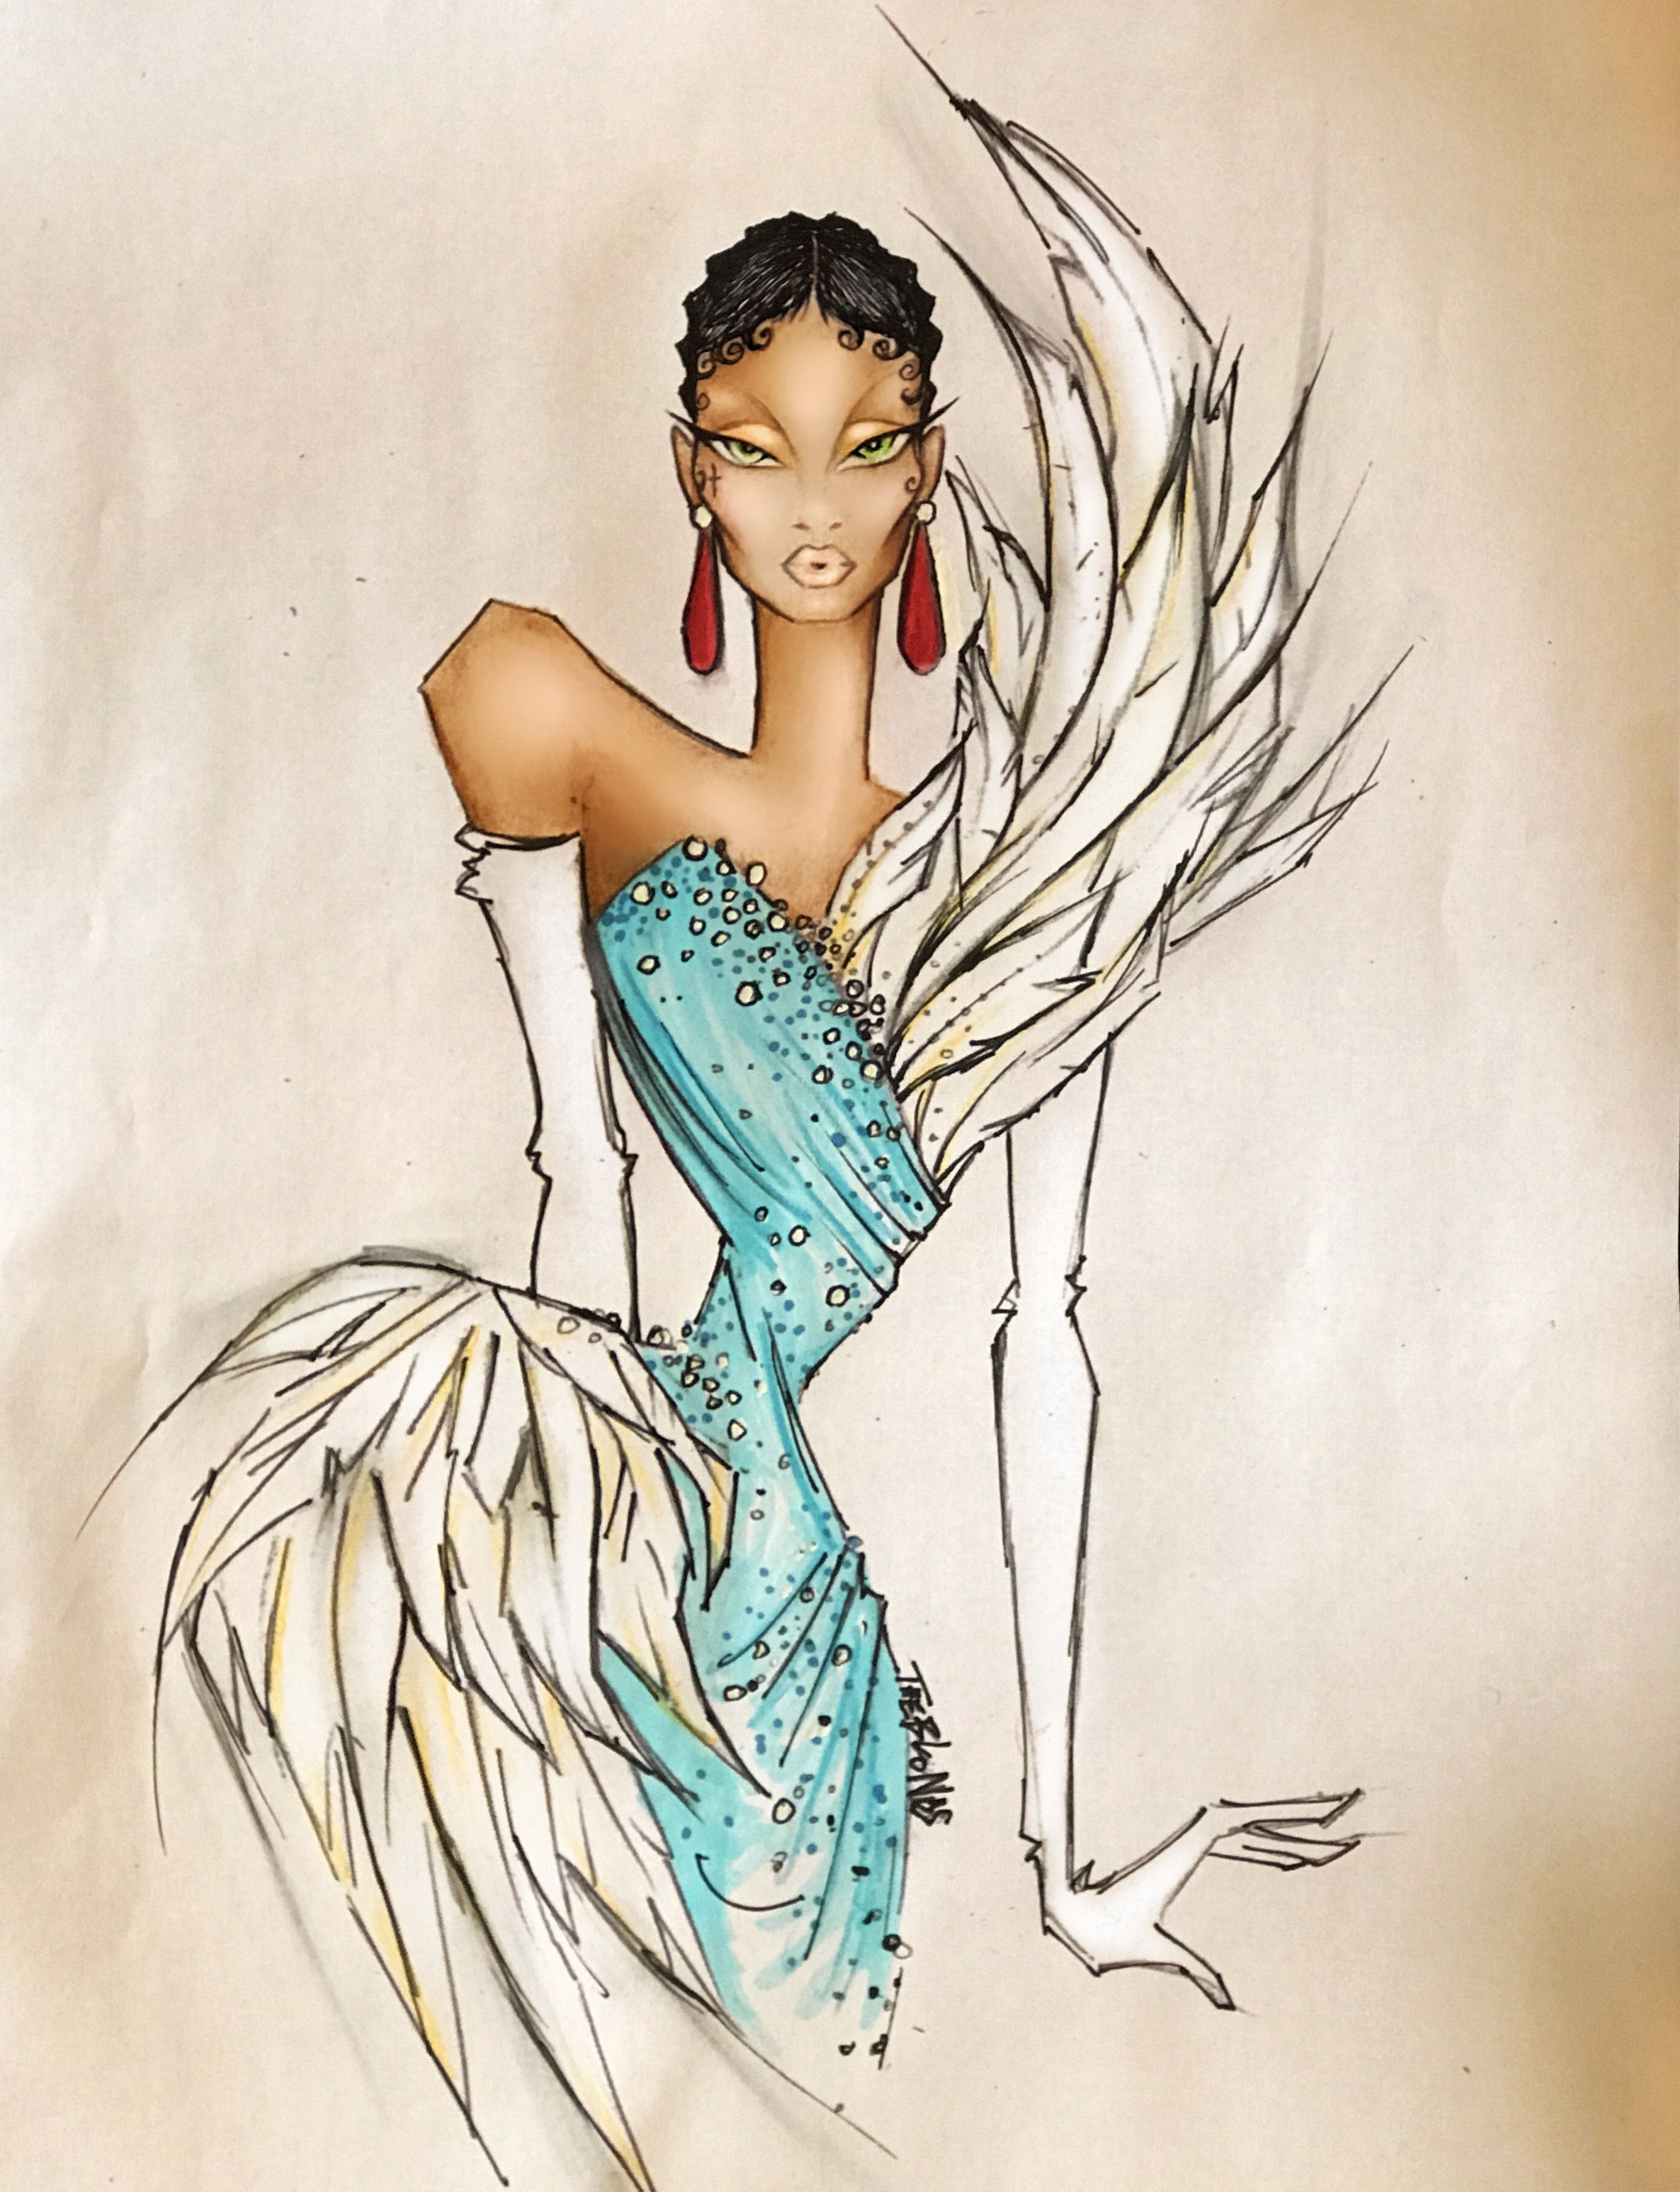 12 Facts About Fashion Illustration Workshop - Facts.net